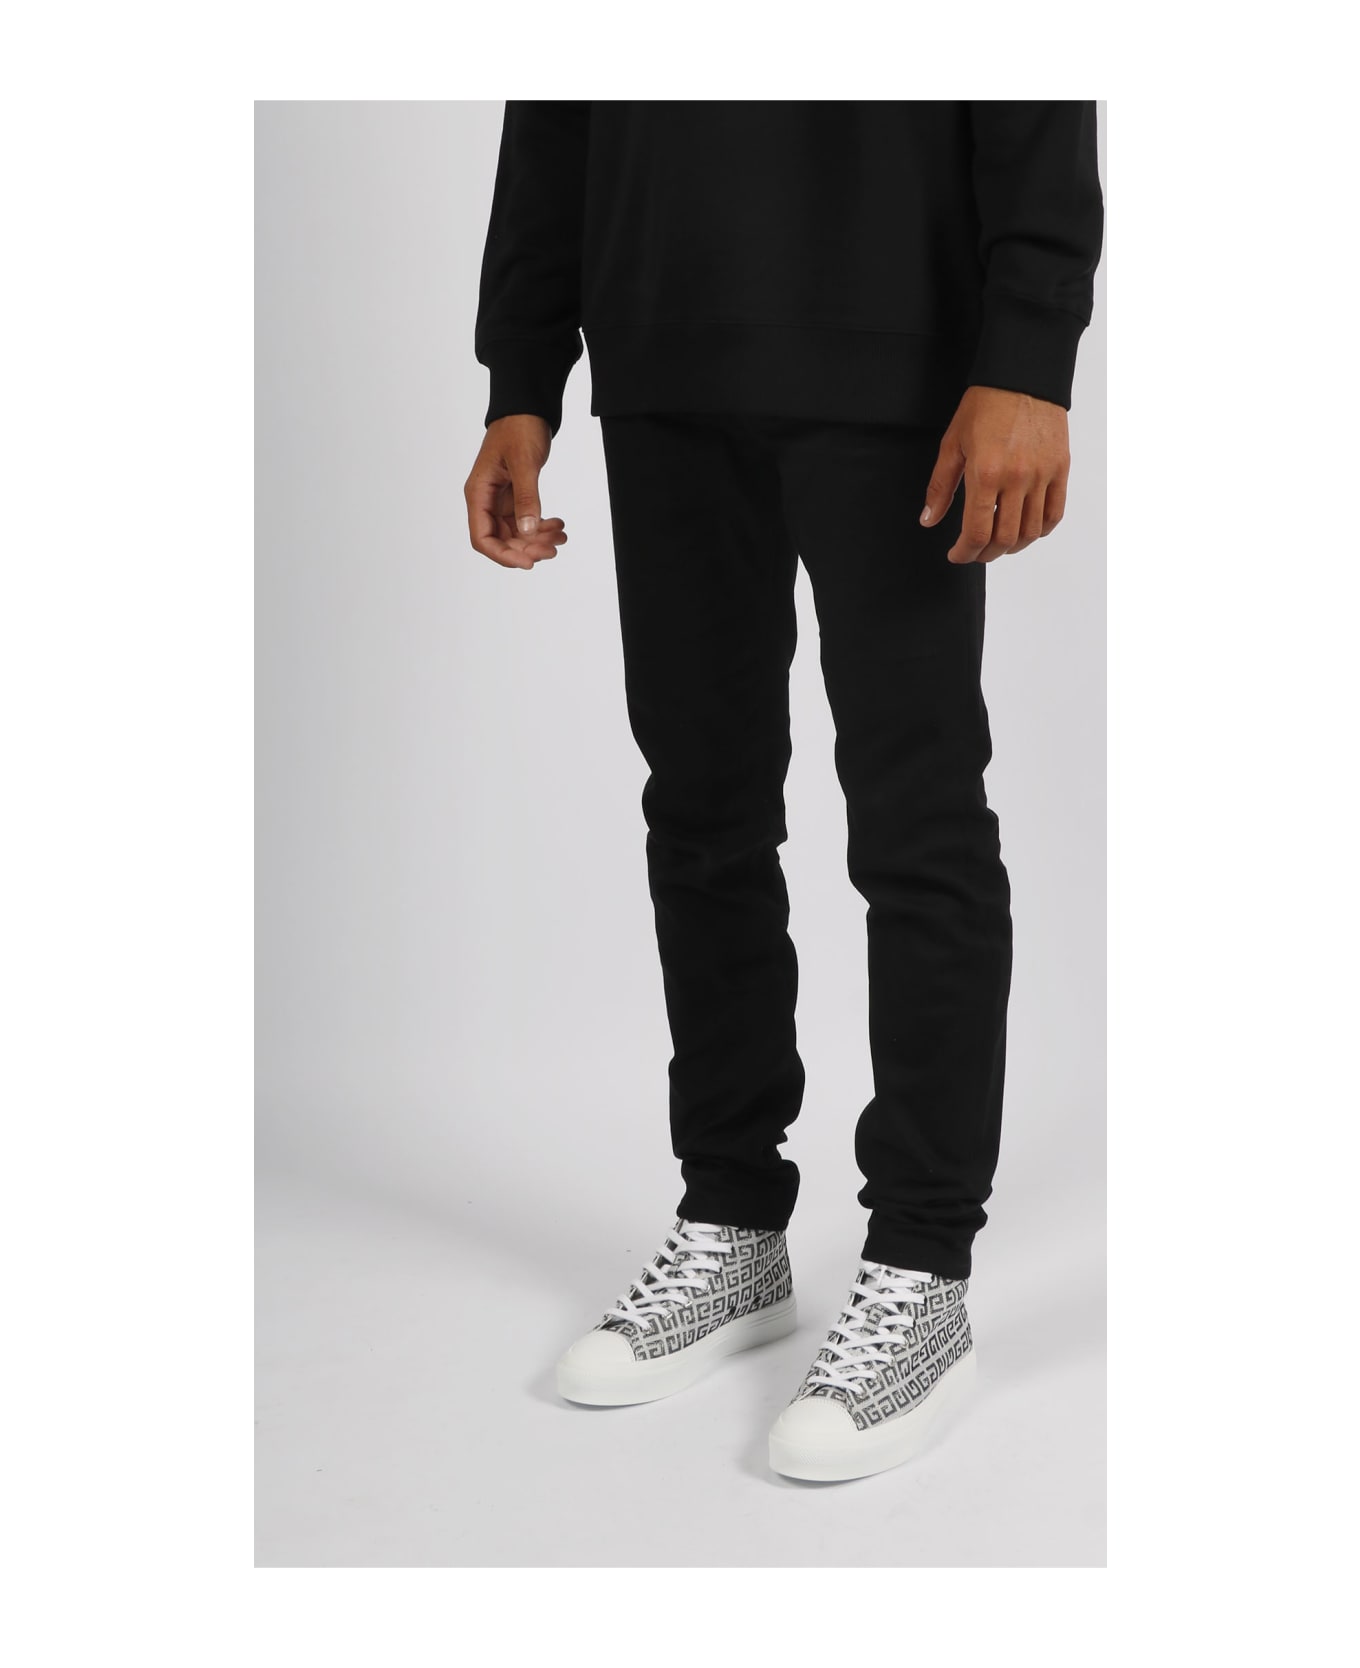 Givenchy Fleece Trousers - BLACK